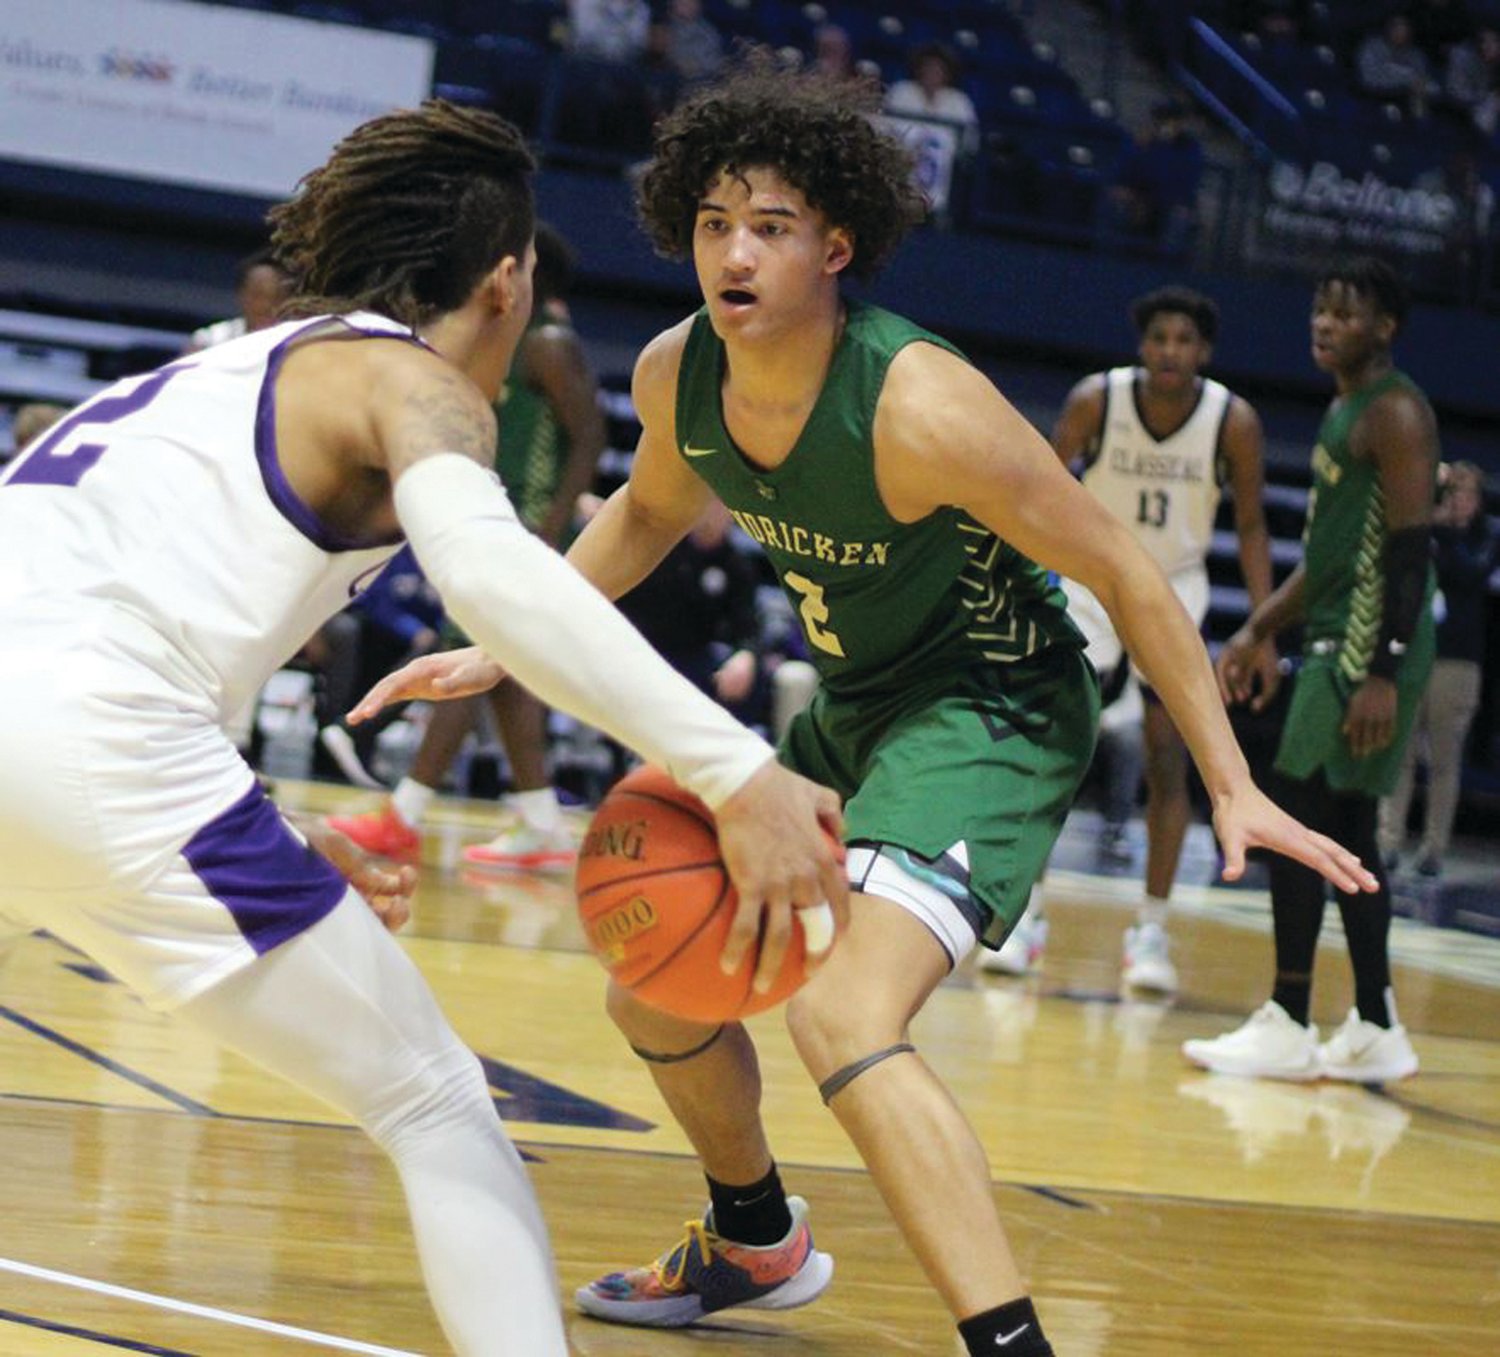 CHAMPIONSHIP PERFORMANCE: Bishop Hendricken’s Cam Chinn plays defense against Classical in the Division I State Championship game at the Ryan Center at URI last week (left).  (right).